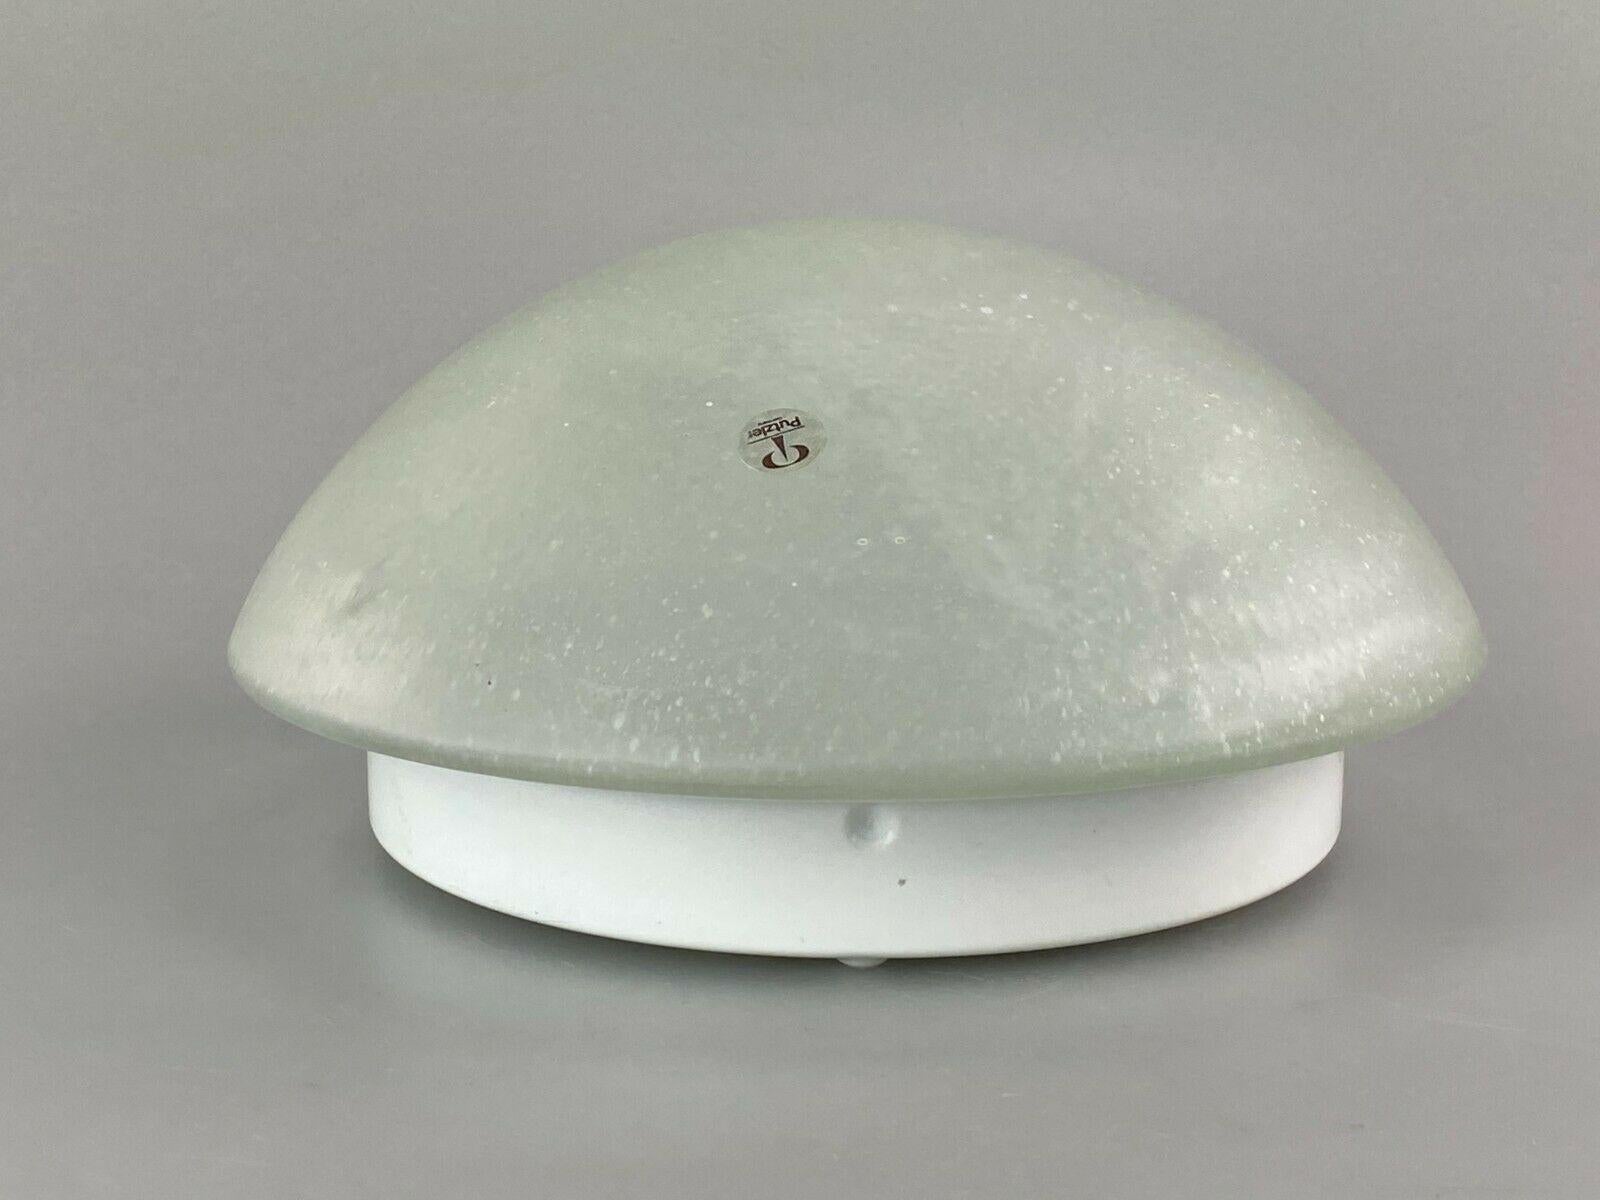 70s Peill & Putzler Plafoniere ceiling lamp glass space design lamp

Object: lamp

Manufacturer: Peill & Putzler

Condition: good

Age: around 1960-1970

Dimensions:

Diameter = 23cm
Height = 11cm

Other notes:

The pictures serve